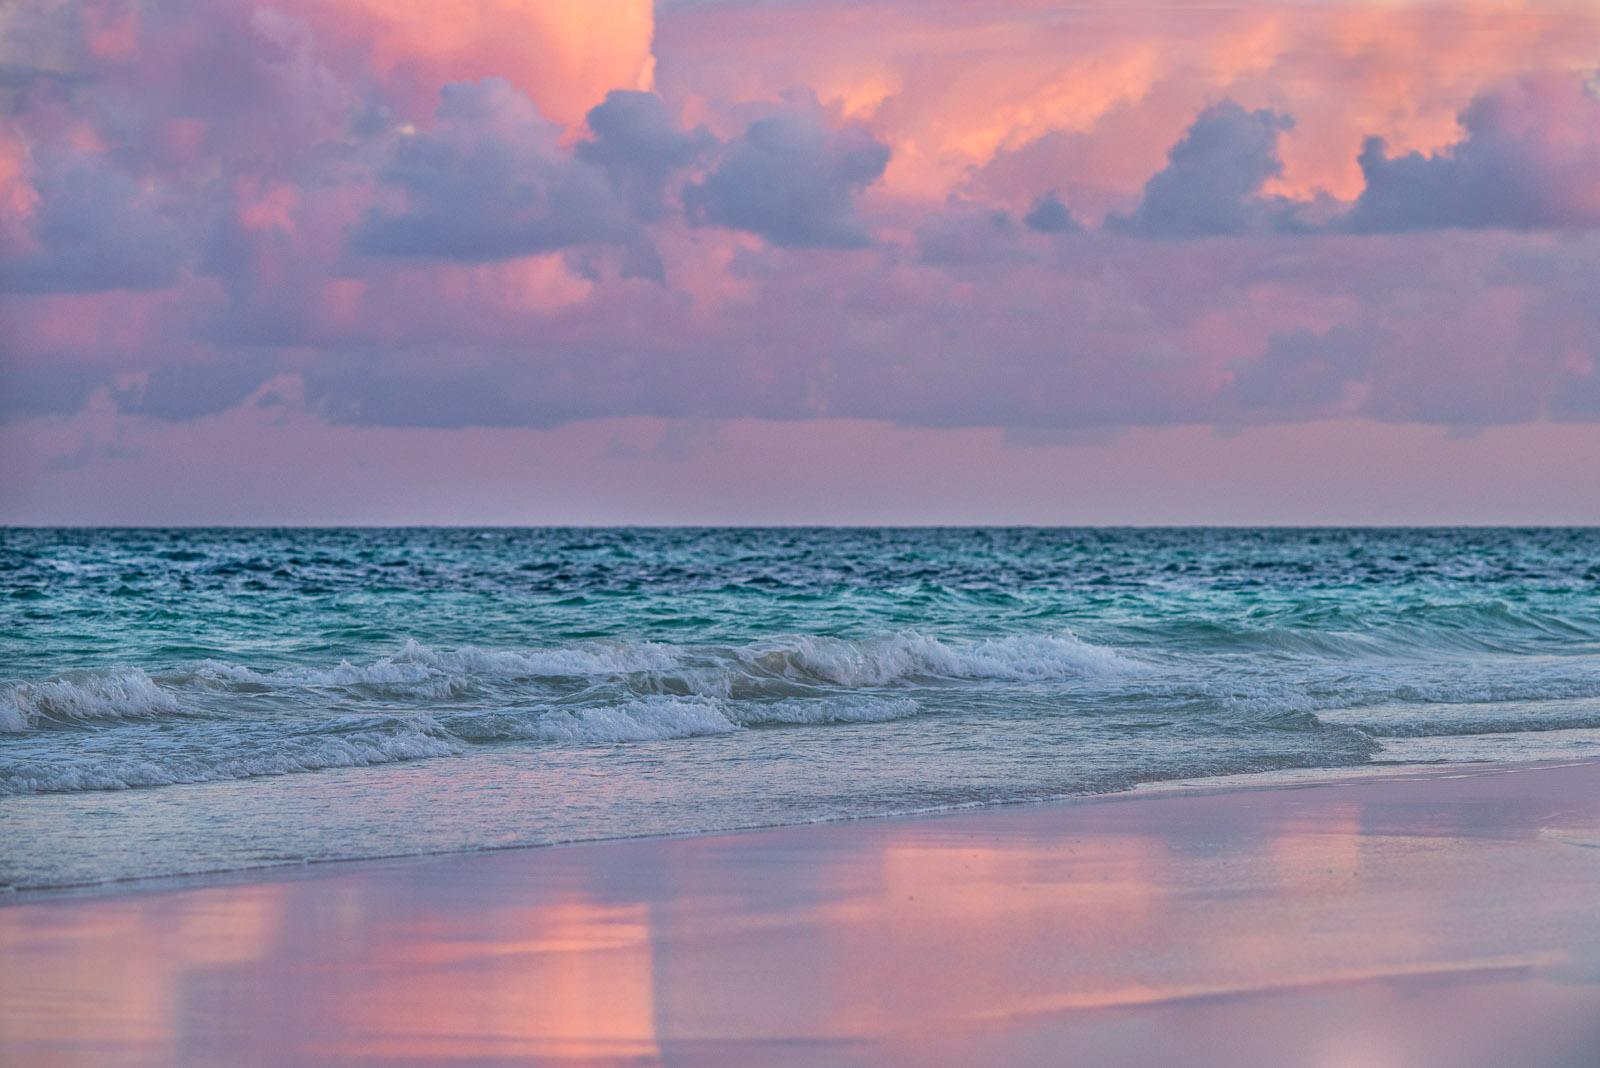 "Mexican Tranquility"- Colorful & Peaceful Dusk on the Ocean, Tulum, Mexico